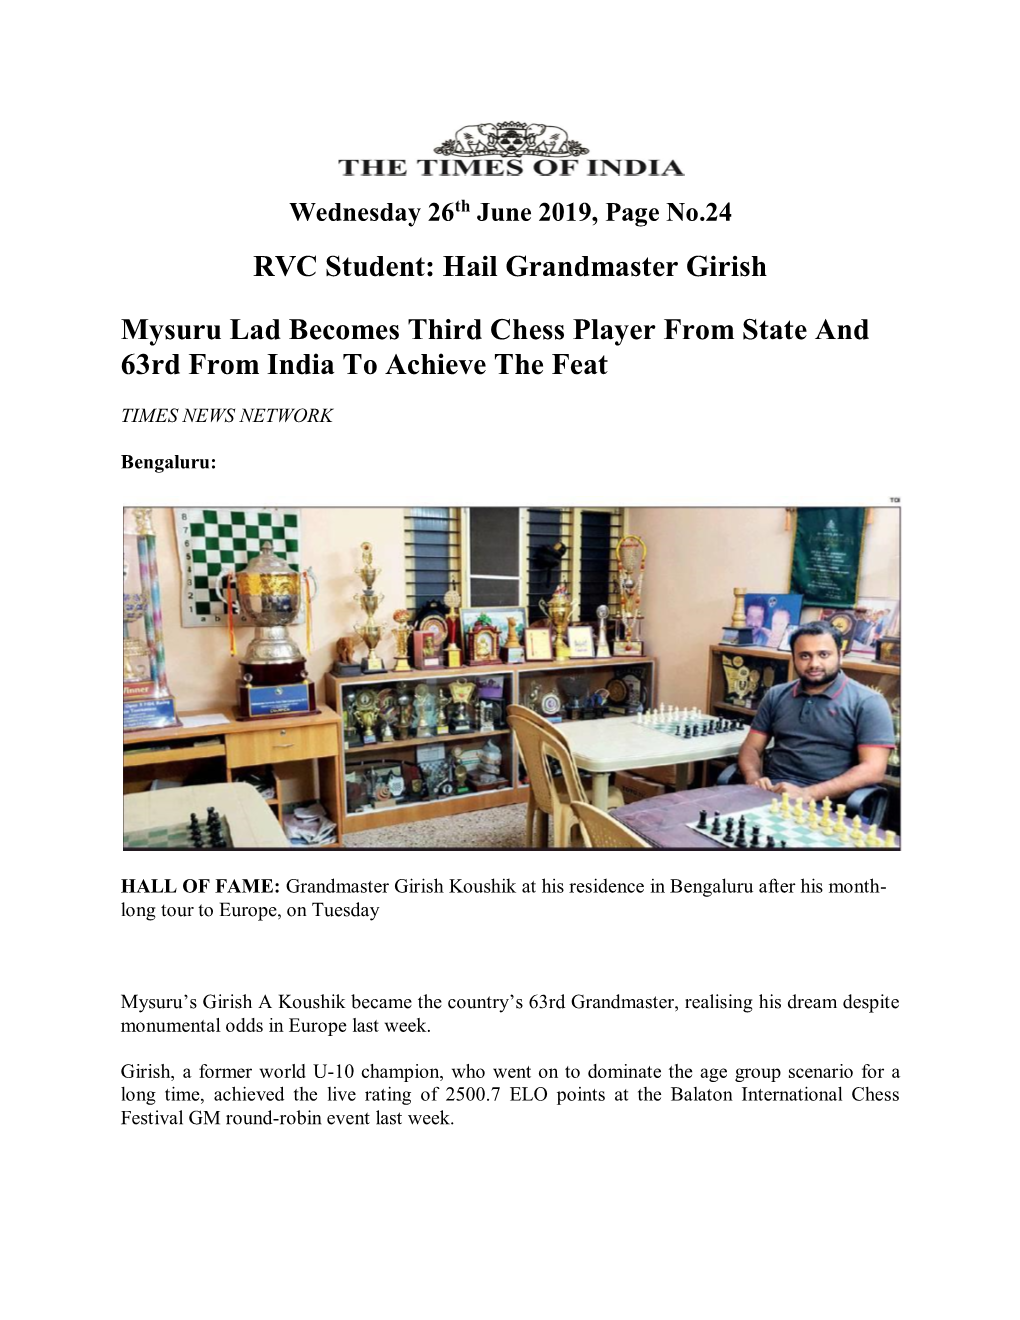 RVC Student: Hail Grandmaster Girish Mysuru Lad Becomes Third Chess Player from State and 63Rd from India to Achieve the Feat